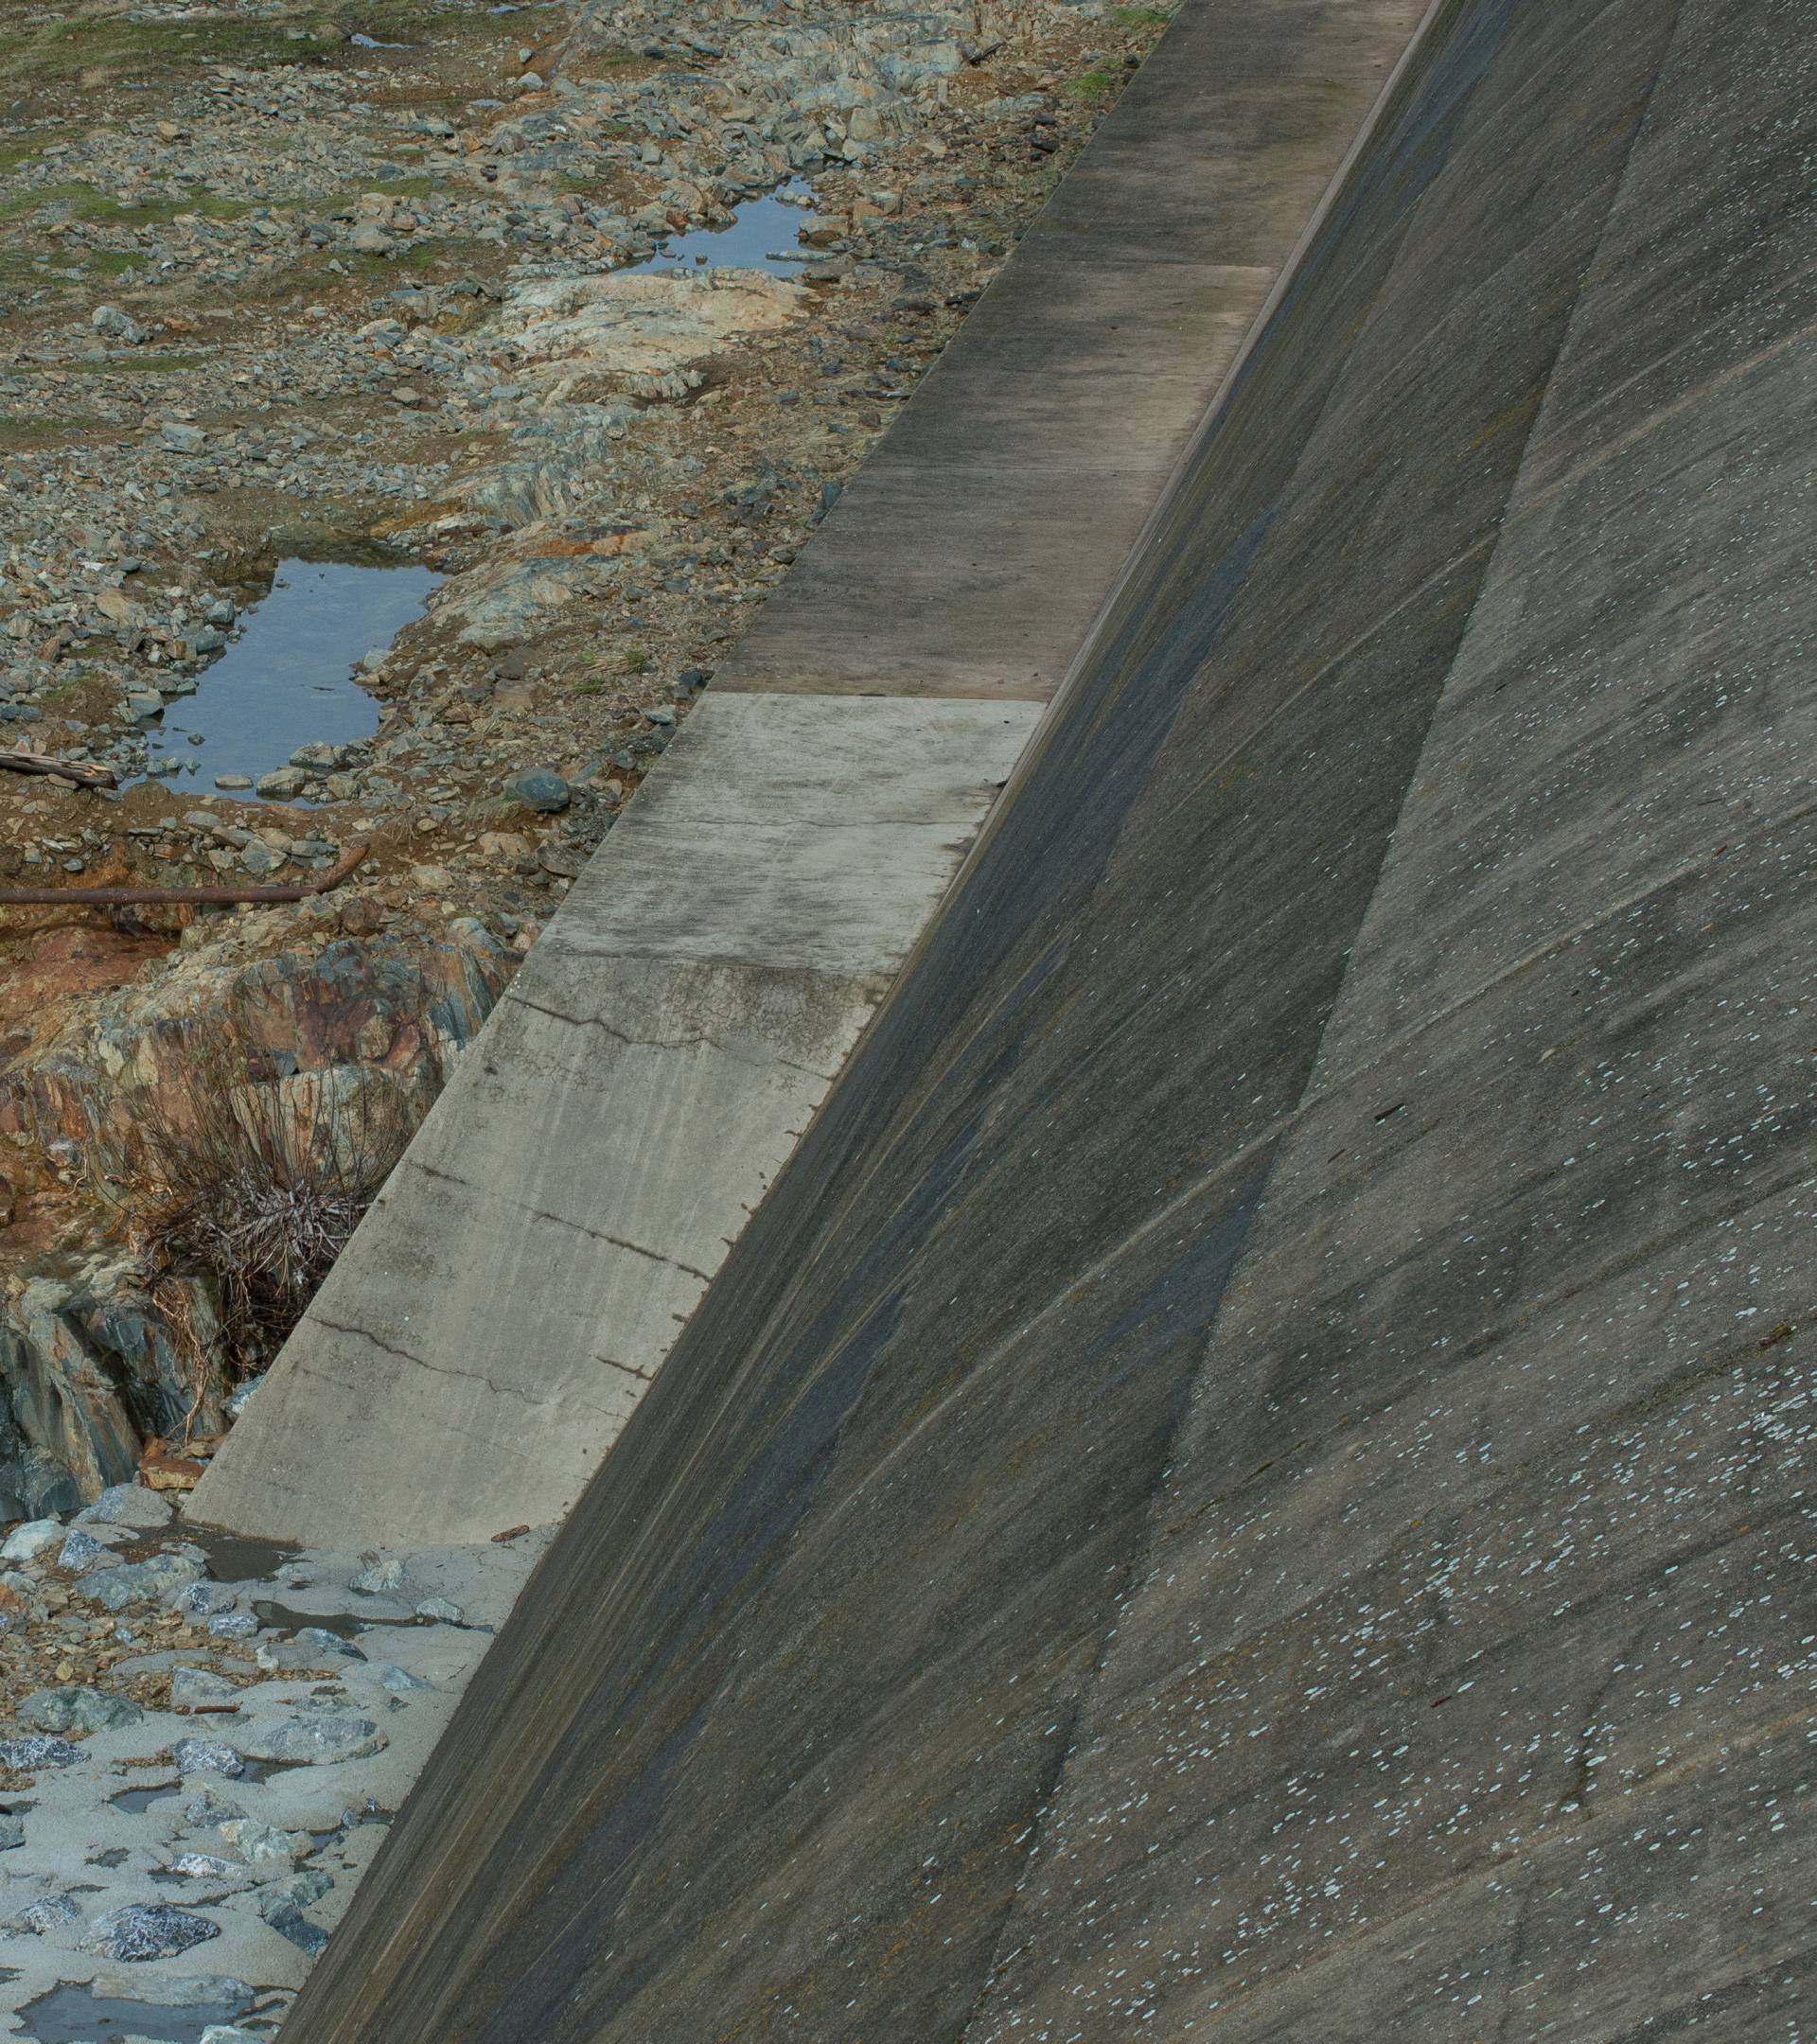 Handout photo of California Department of Water Resources crews inspect and evaluate the erosion just below the Lake Oroville Emergency Spillway site after lake levels receded, in Oroville